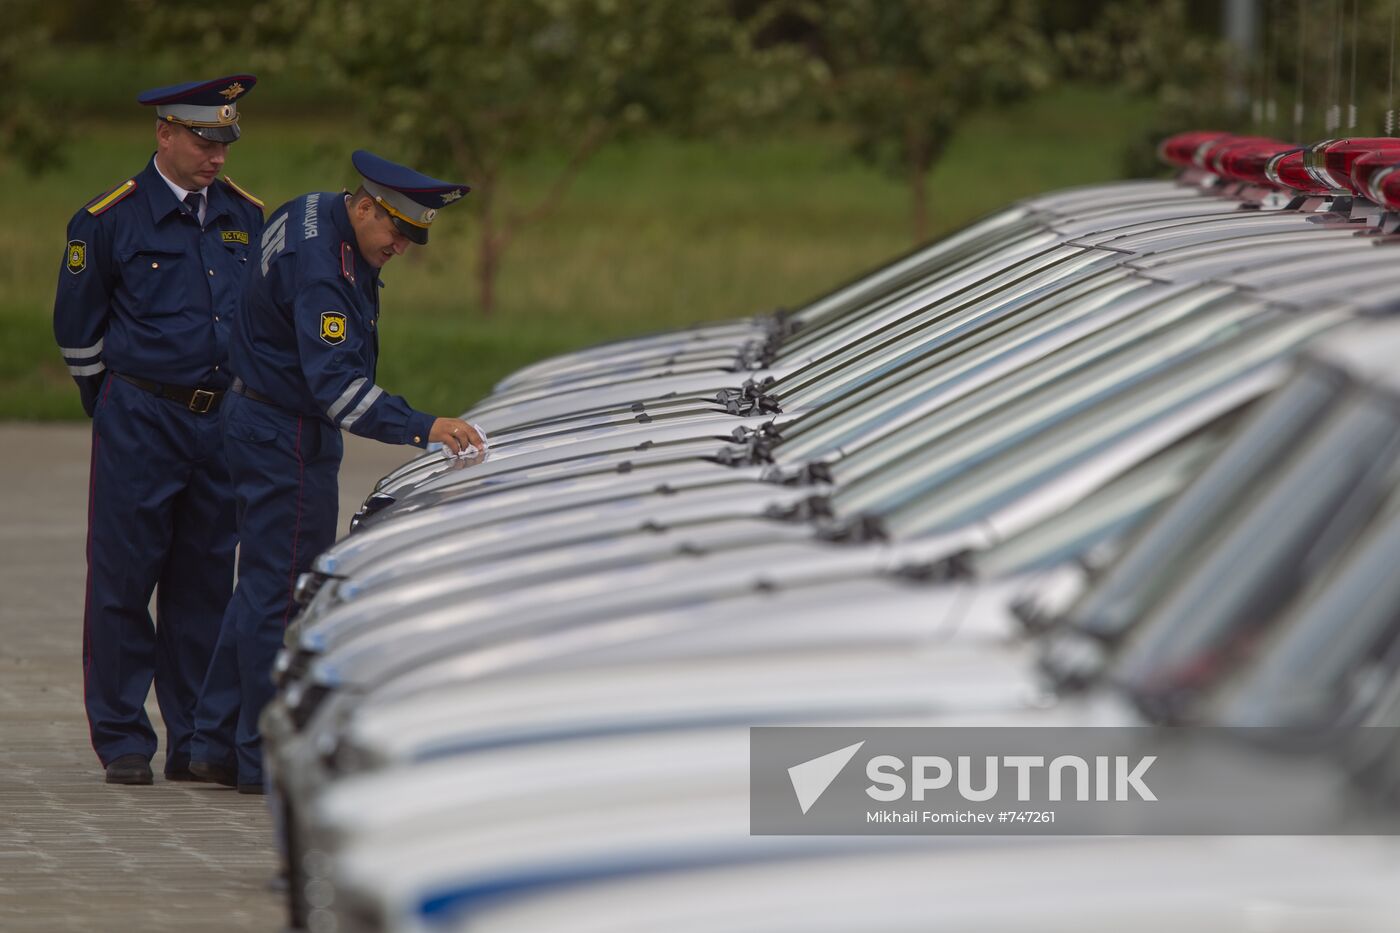 Moscow's Southwestern district police receive 70 cars